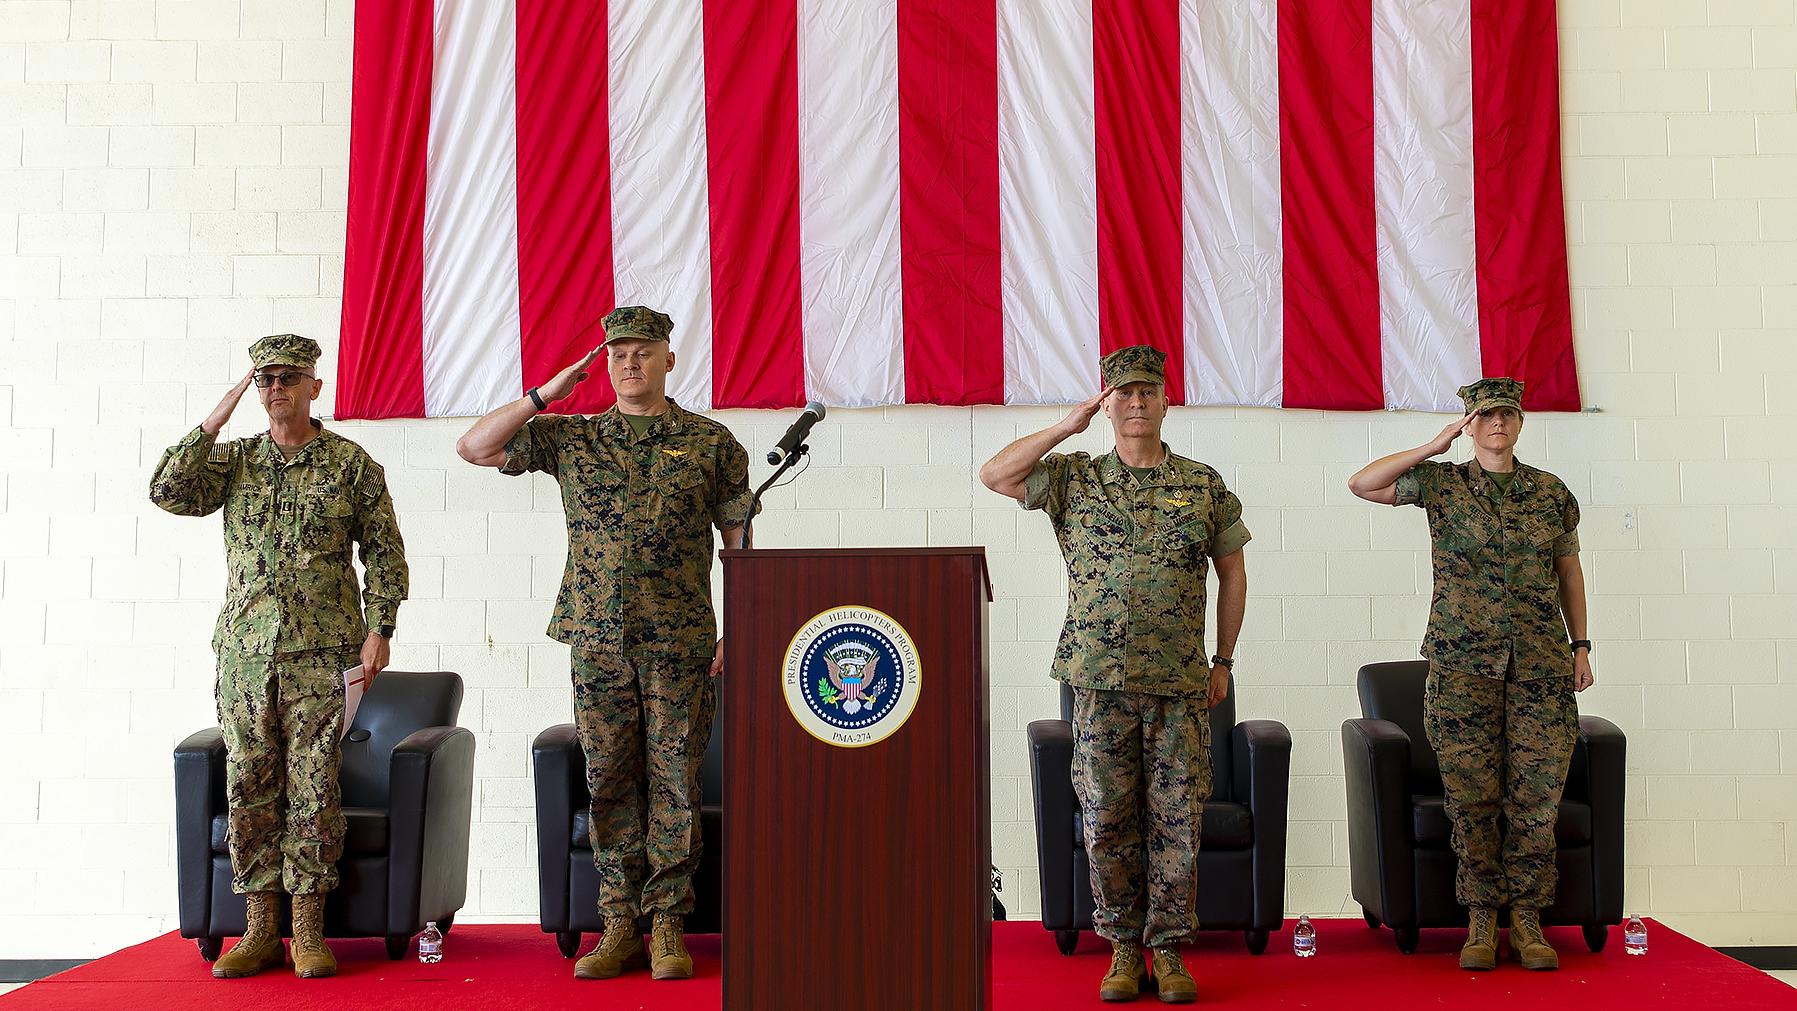 Change of Command Salute May 2022